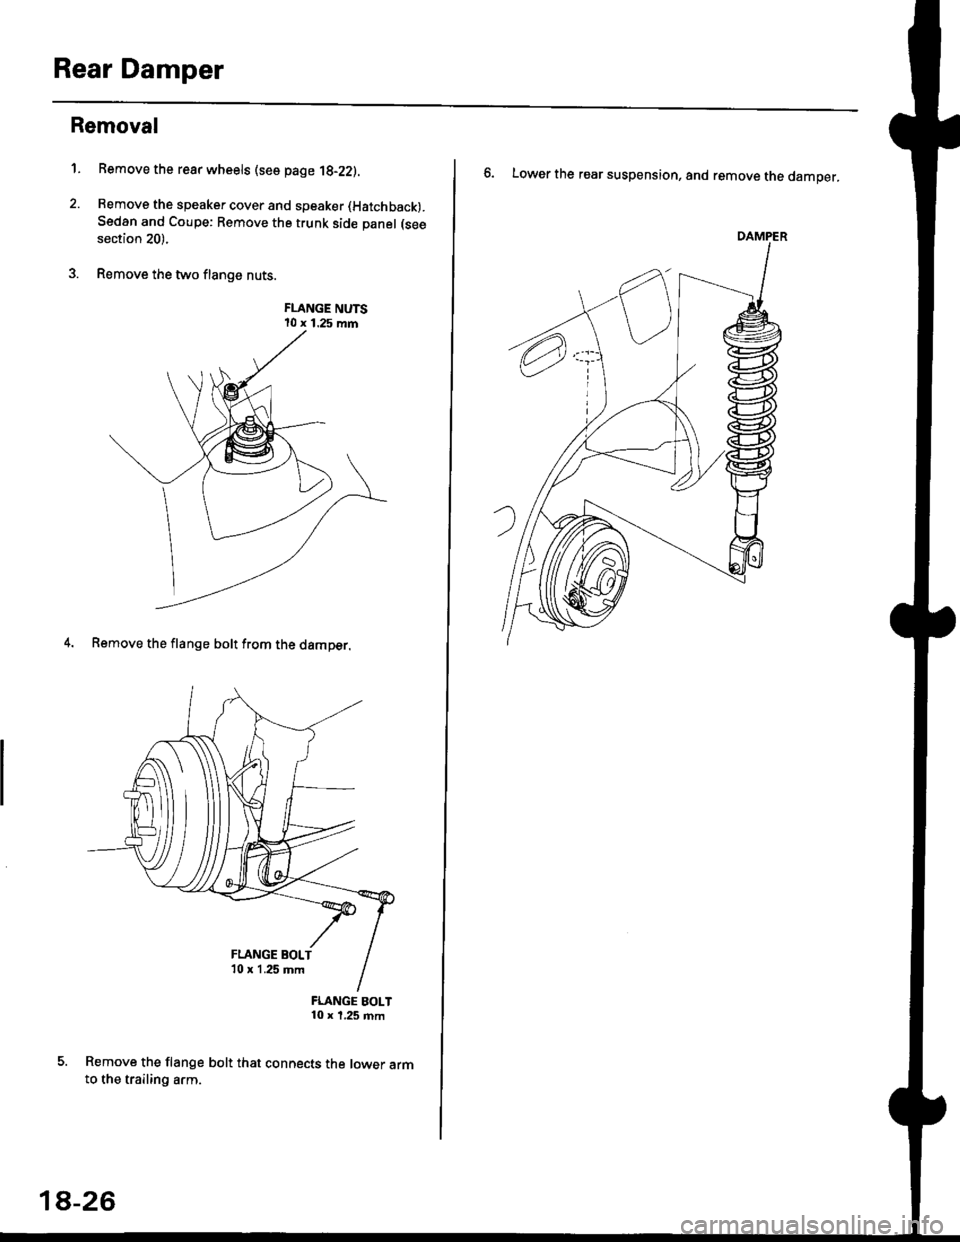 HONDA CIVIC 1996 6.G Workshop Manual Rear Damper
Removal
1. Bemove the rear wheels (see page 1g-22).
2. Remove the speaker cover and speaker (Hatchback).
Sedan and Coupe: Remove the trunk side panel (see
section 20).
3. Remove the two fl